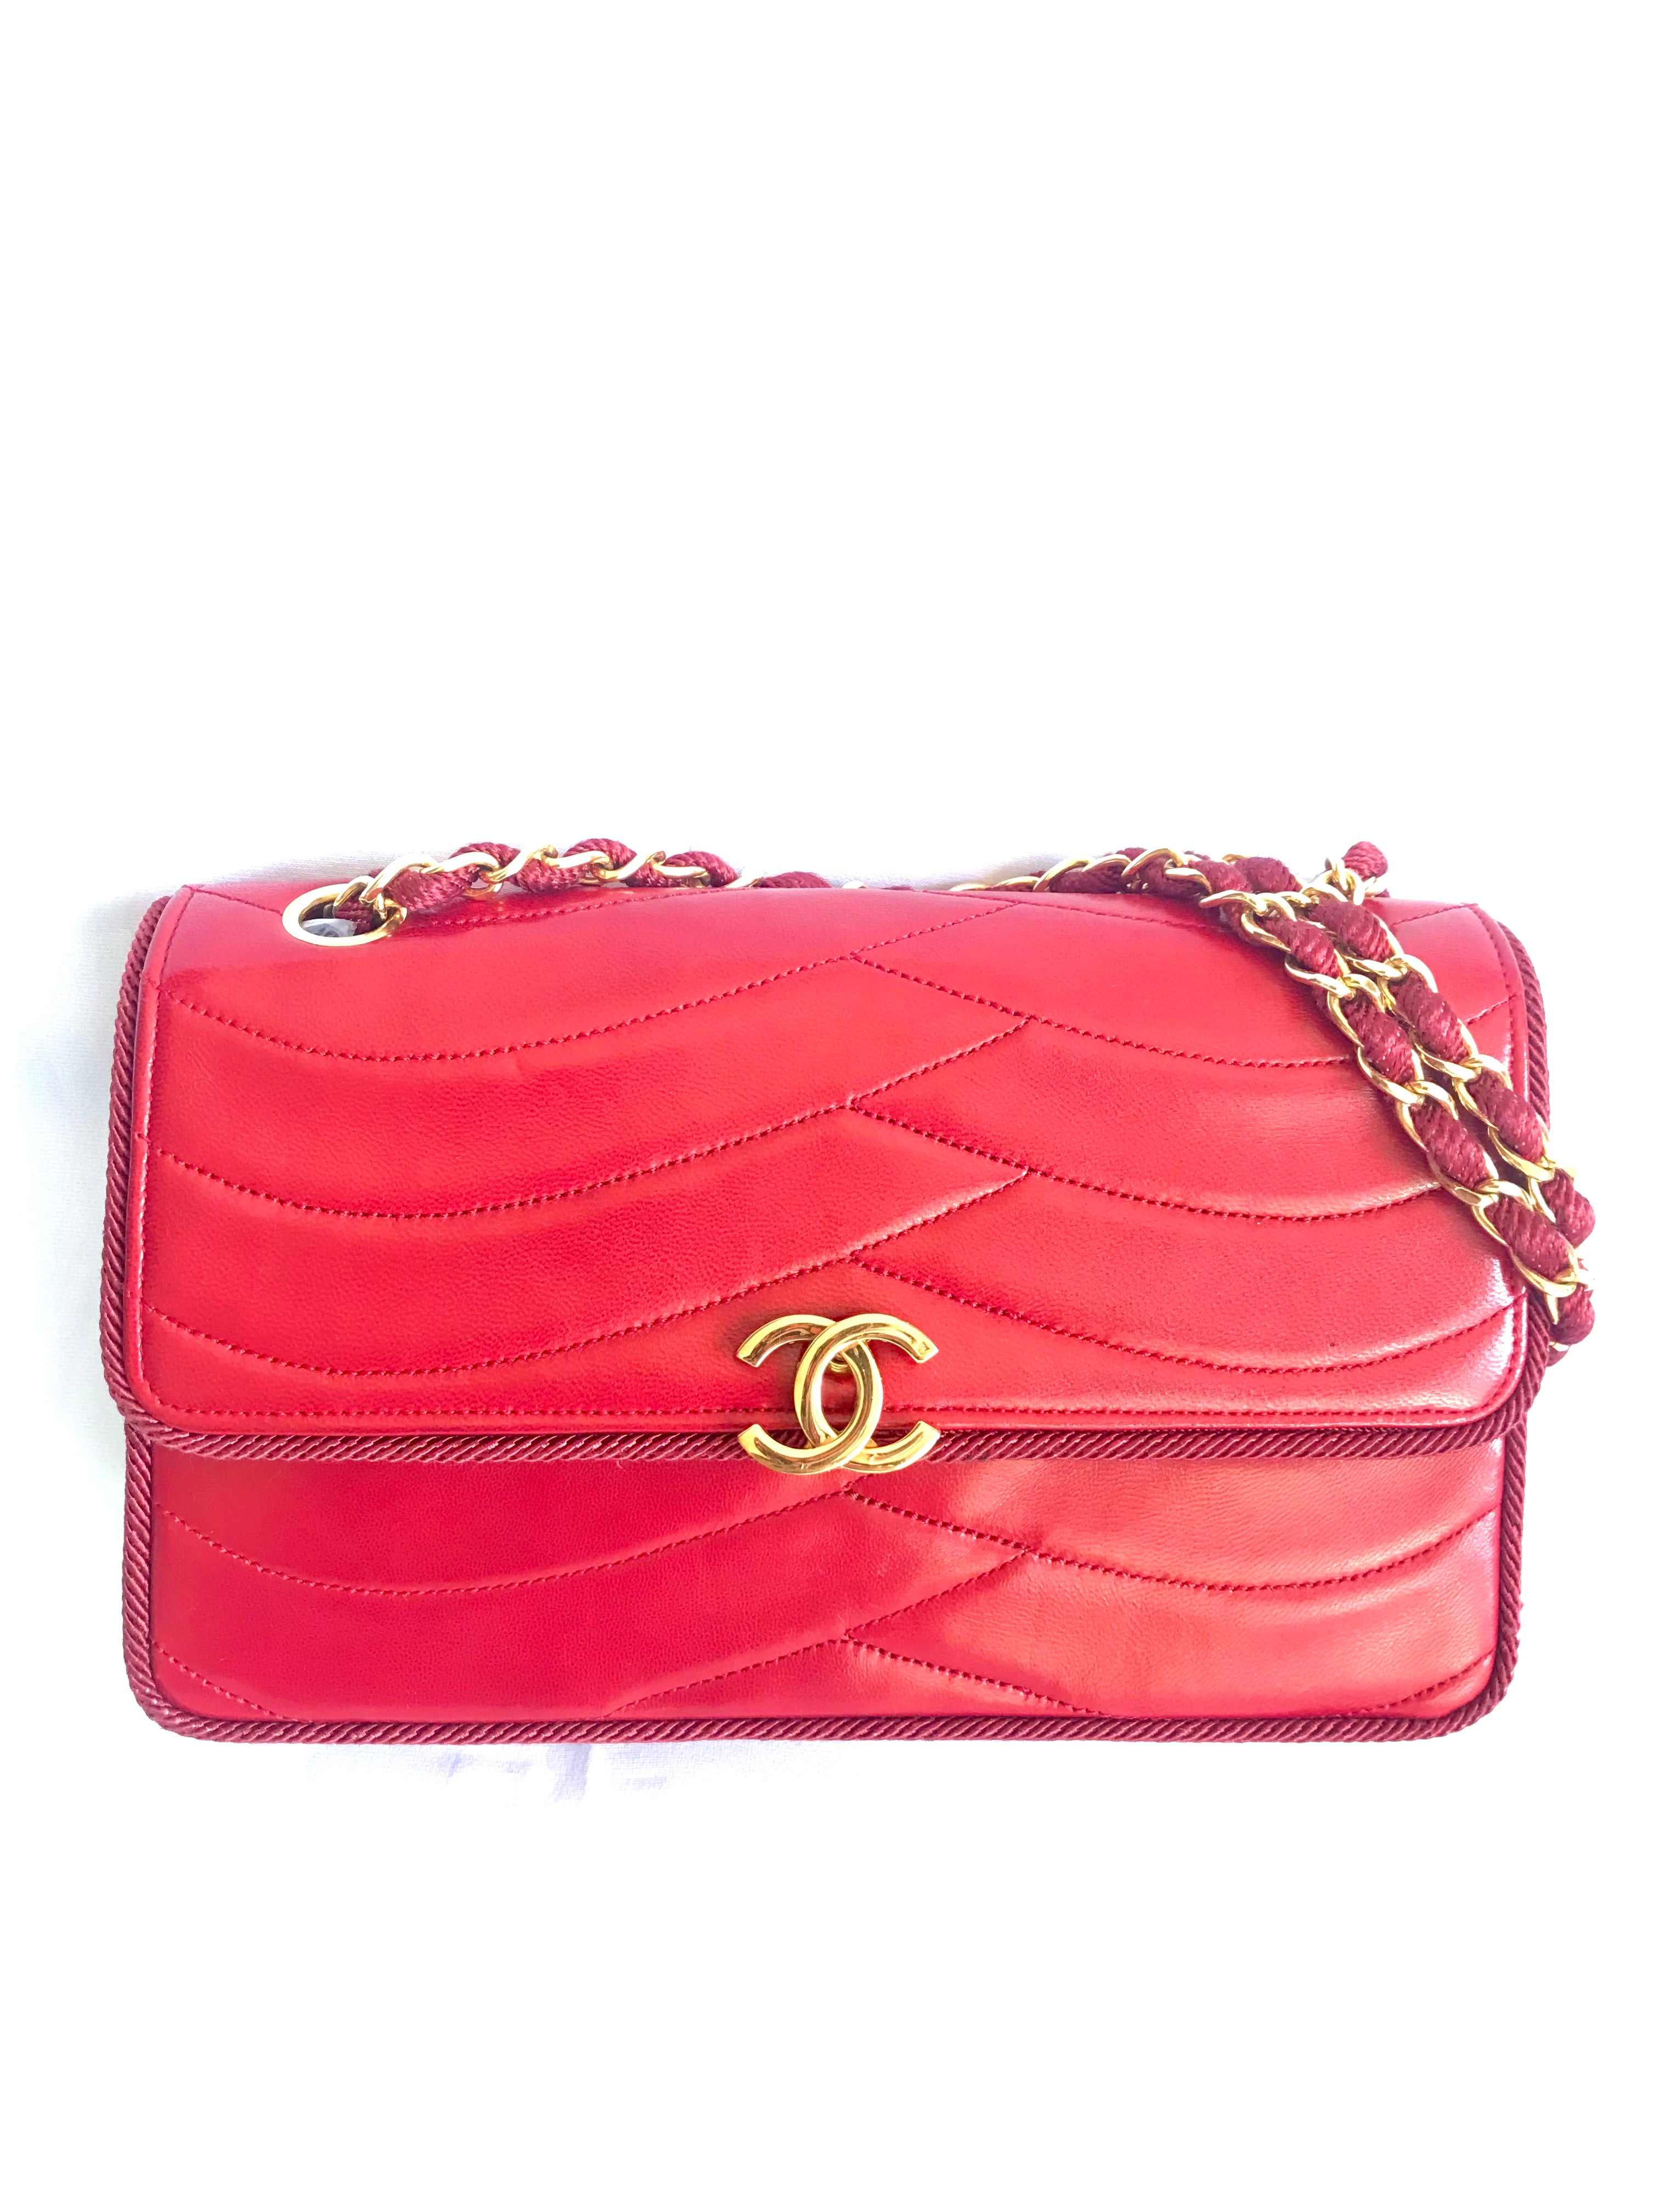 red chanel chain bag strap